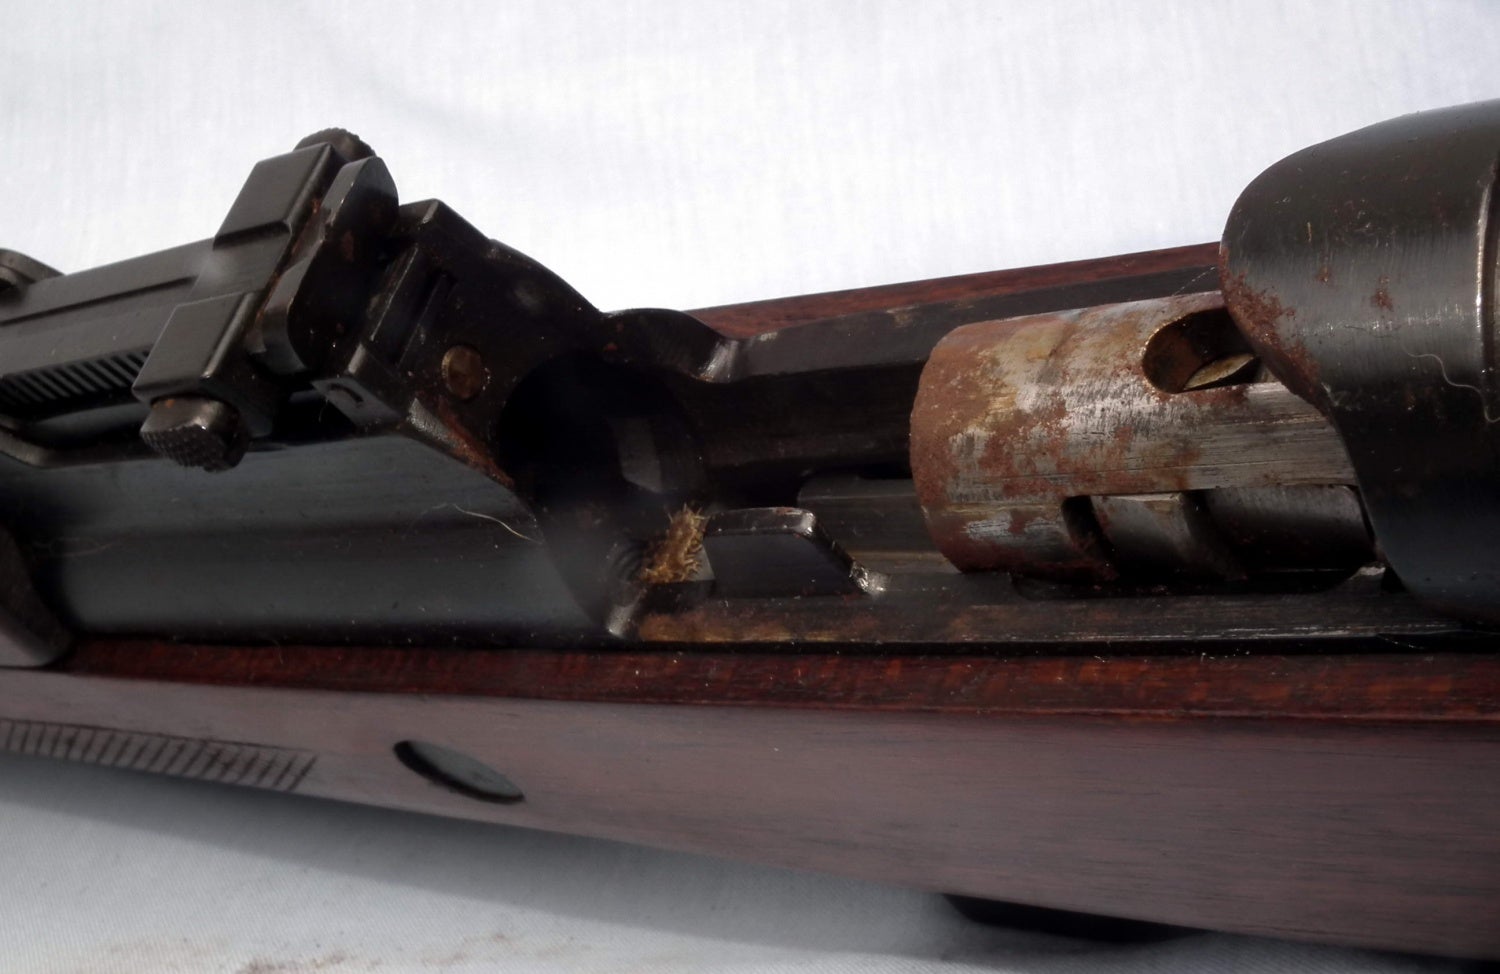 This open chamber view clearly shows the left breech locking lug on the side of the (somewhat rusted) bolt.